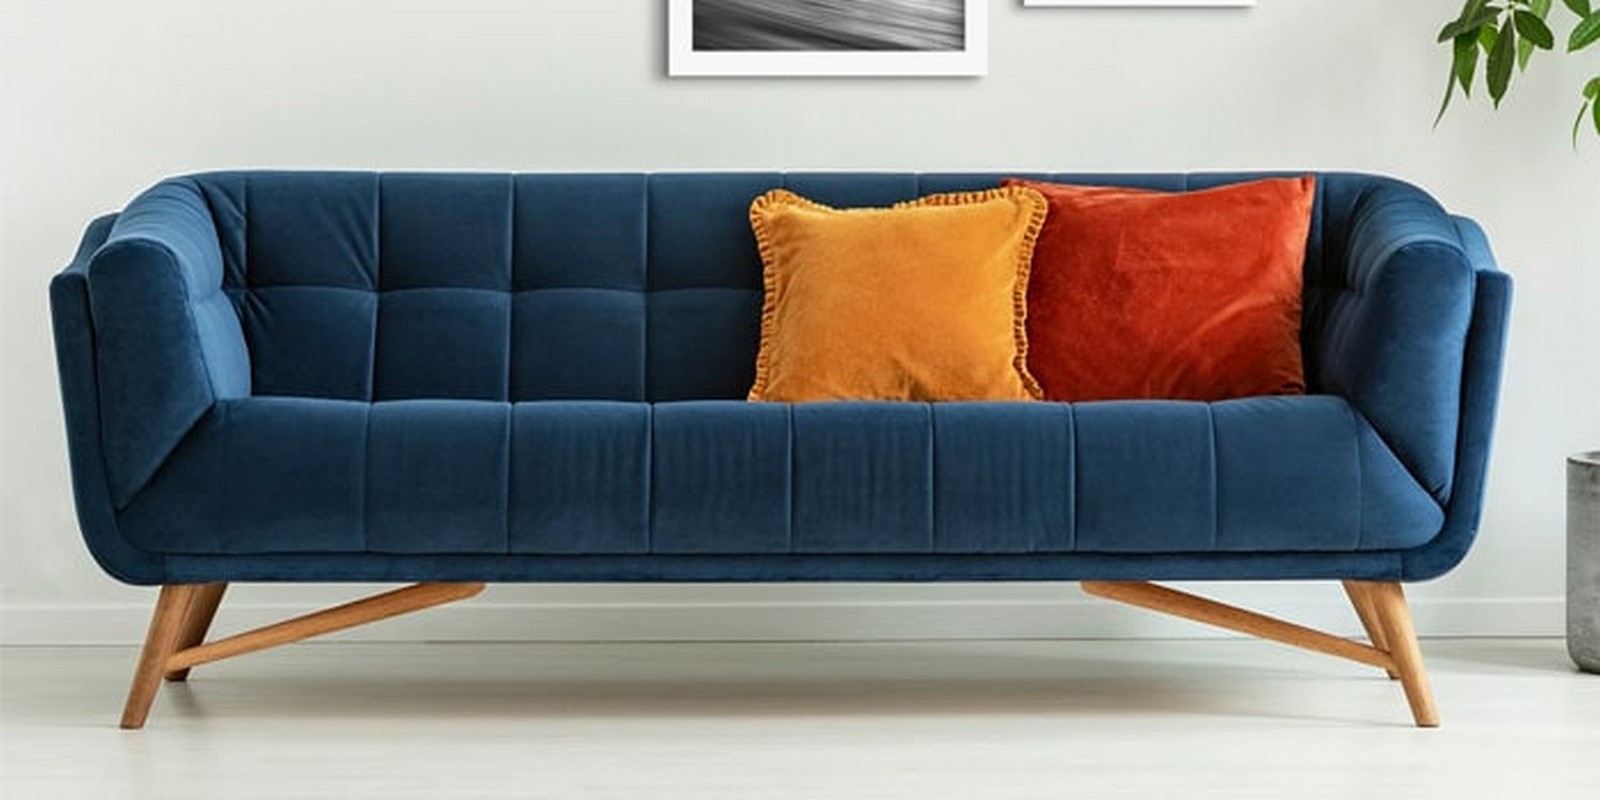 10 Sofa designs everyone should know about - Sheet1